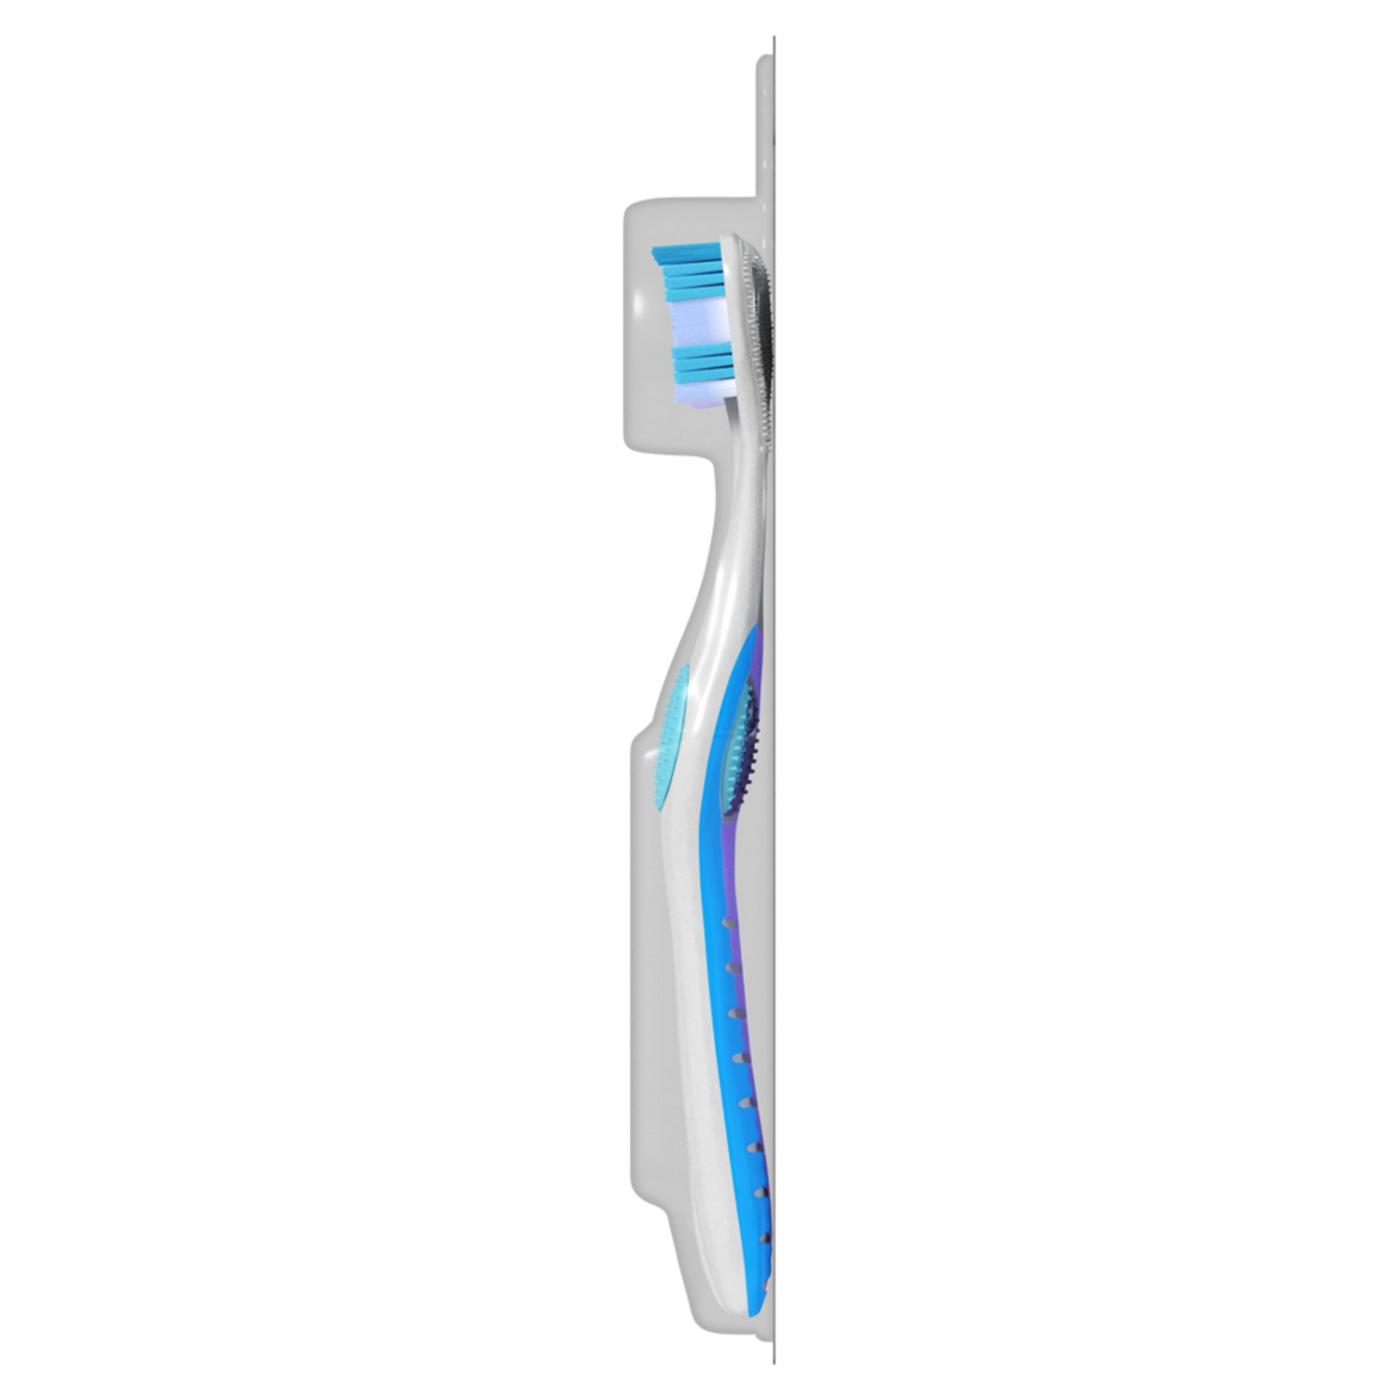 Colgate 360 Enamel Health Sensitive Toothbrush, Extra Soft - Colors May Vary; image 10 of 10